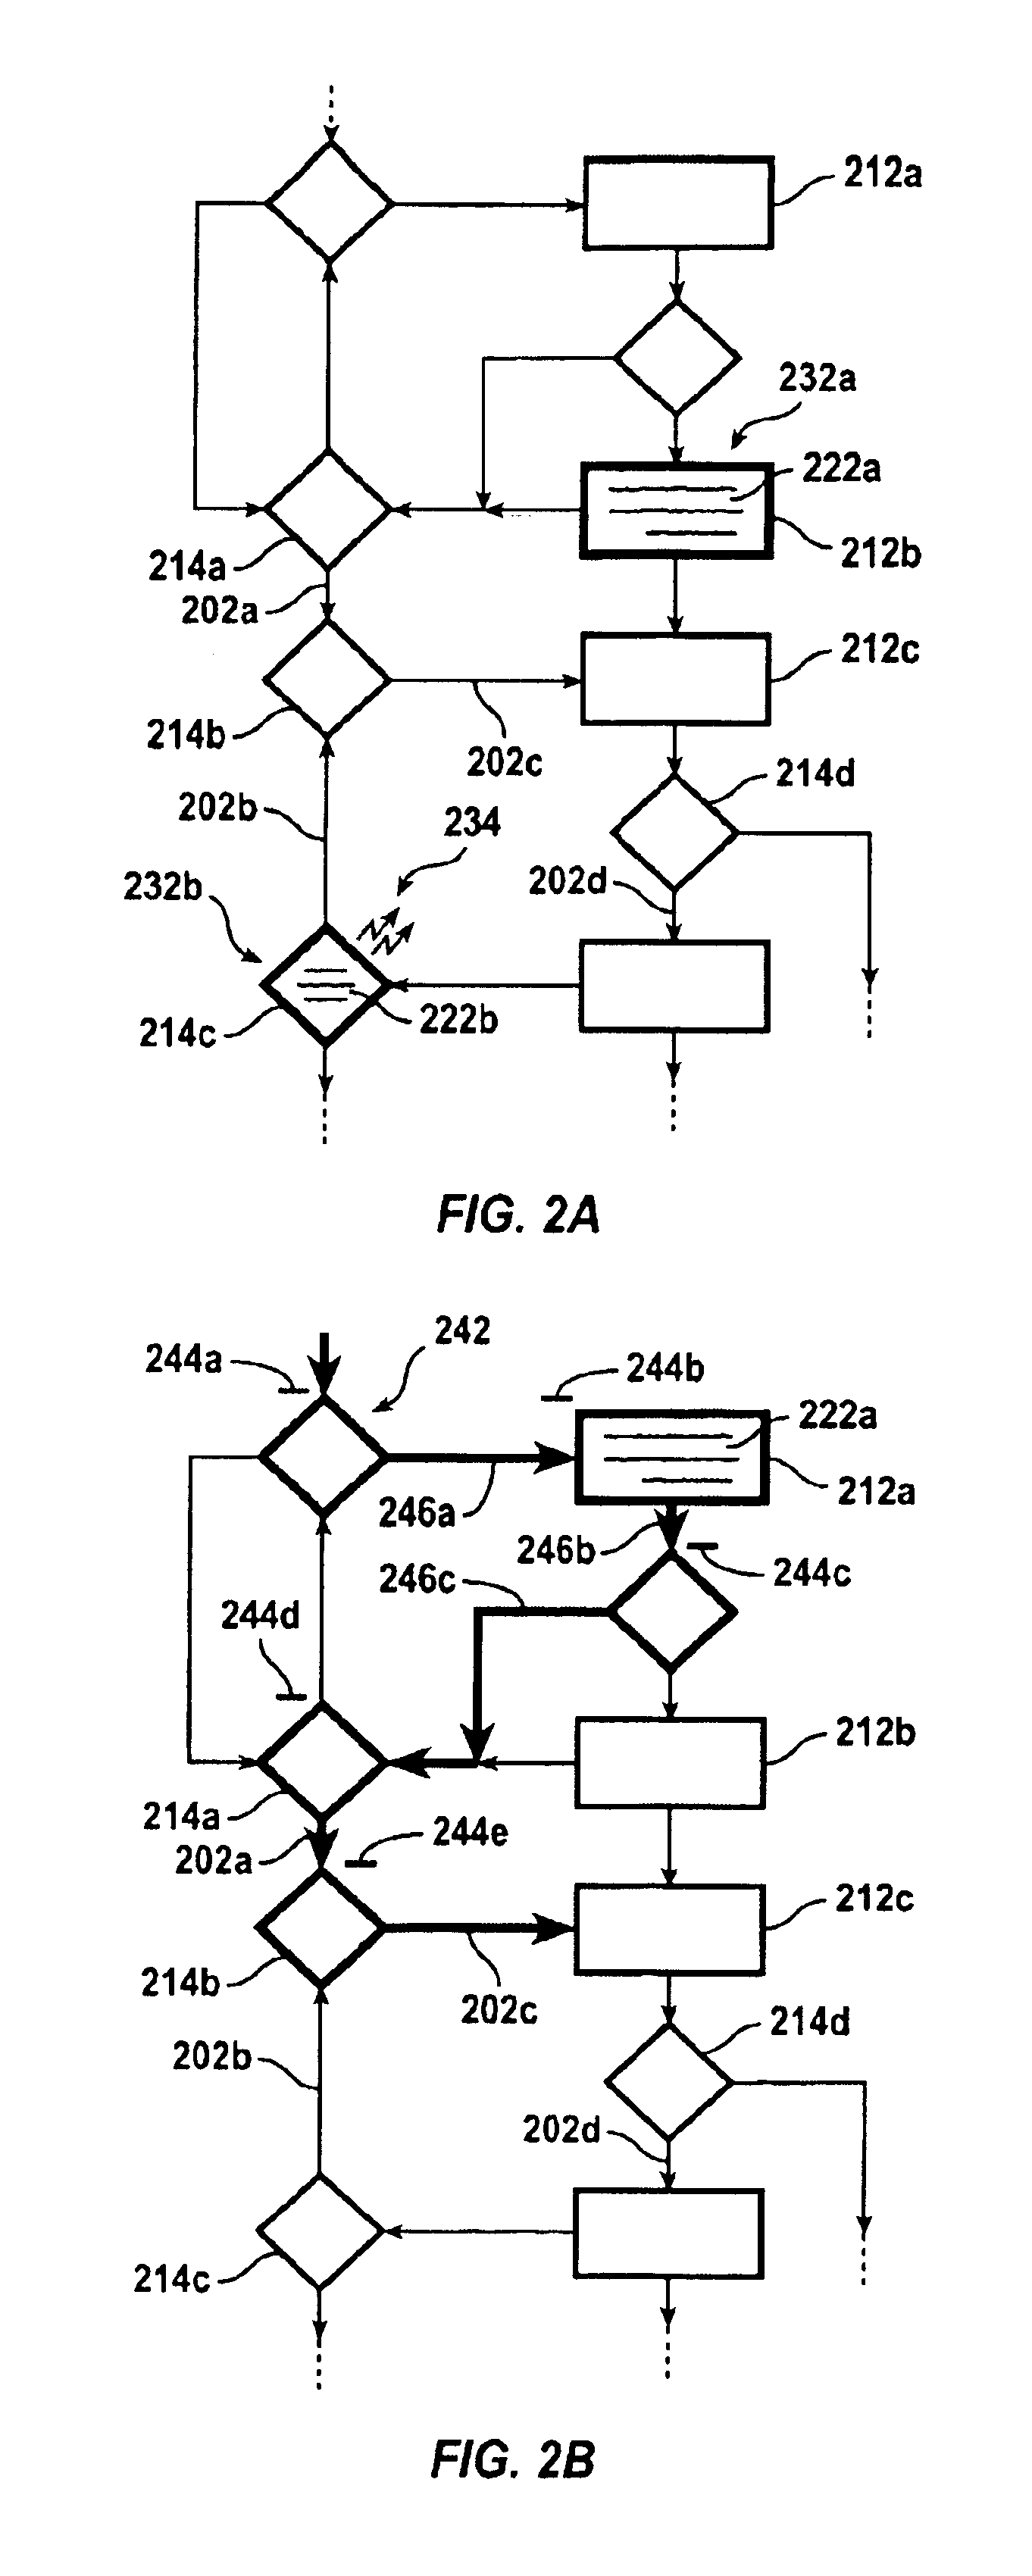 Method and apparatus for tracking documents in a workflow